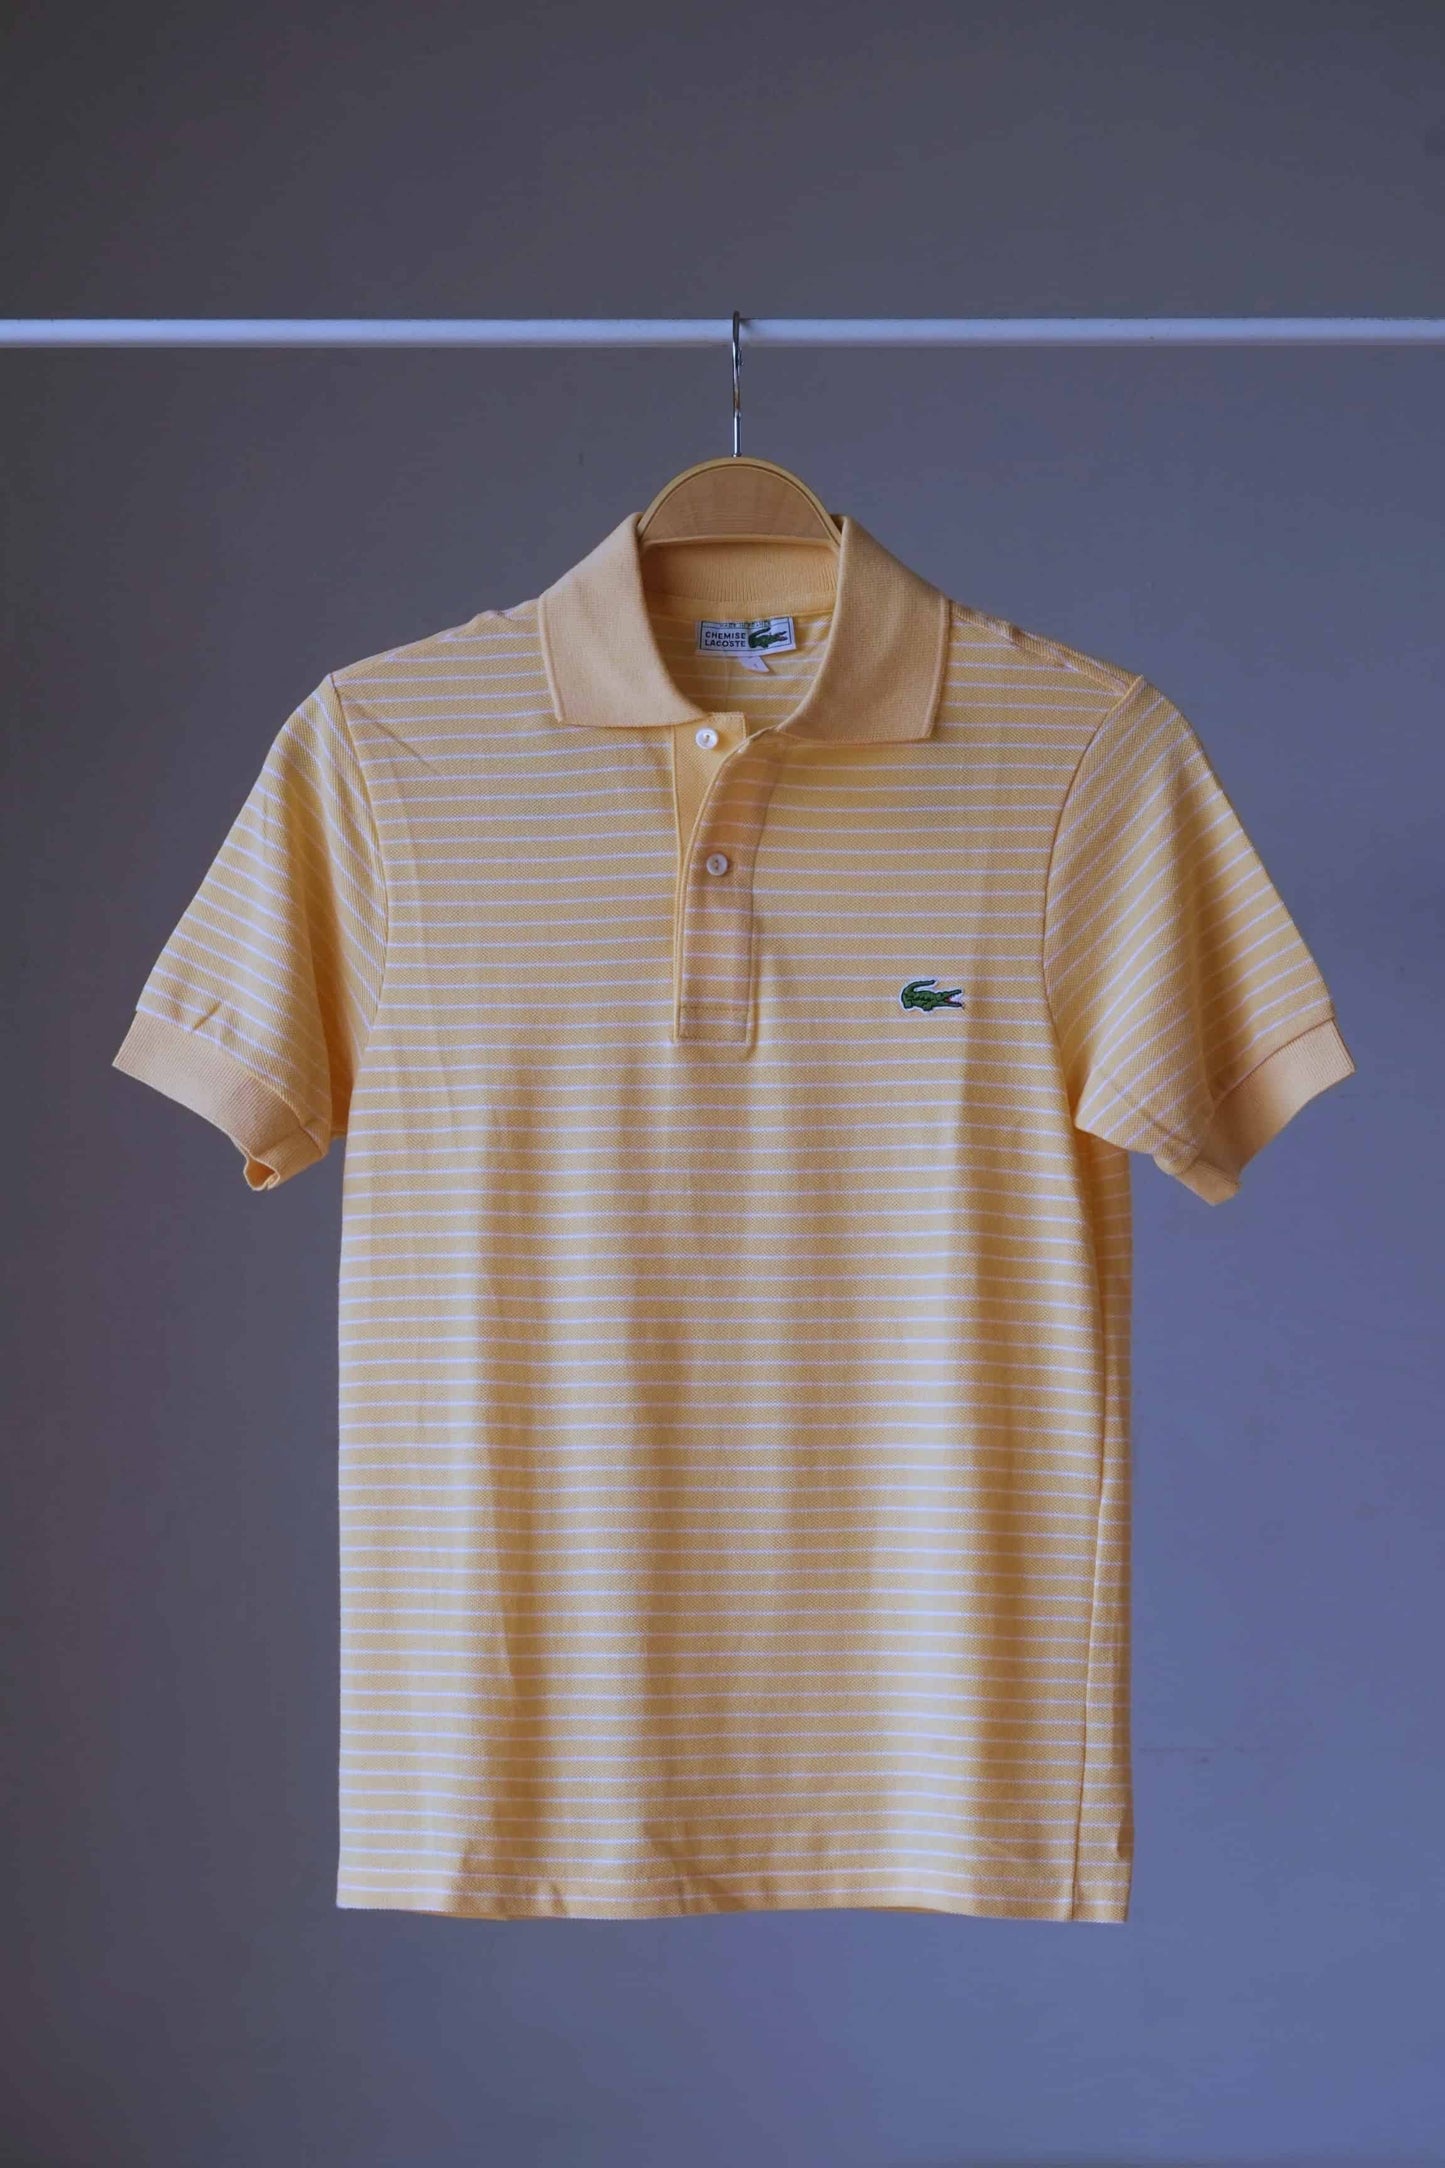 LACOSTE Striped Polo in melon color on hanger